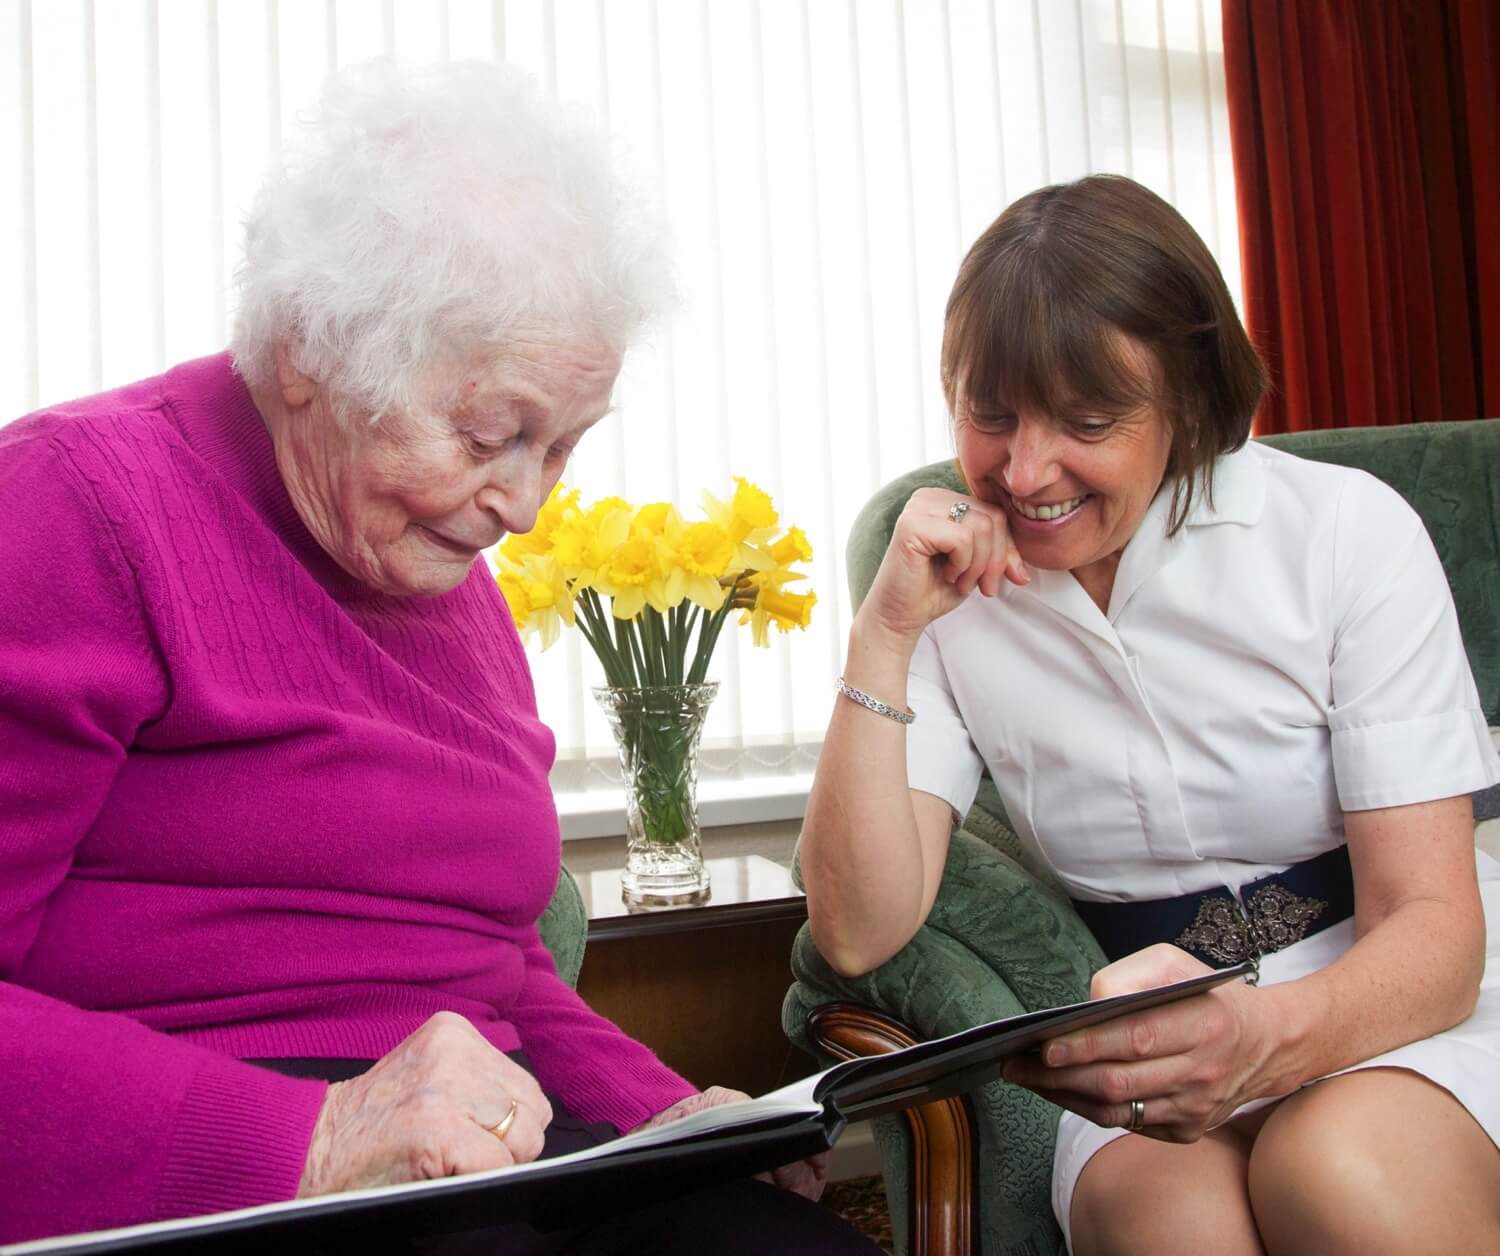 Nurse care worker visiting and caring for an elderly client